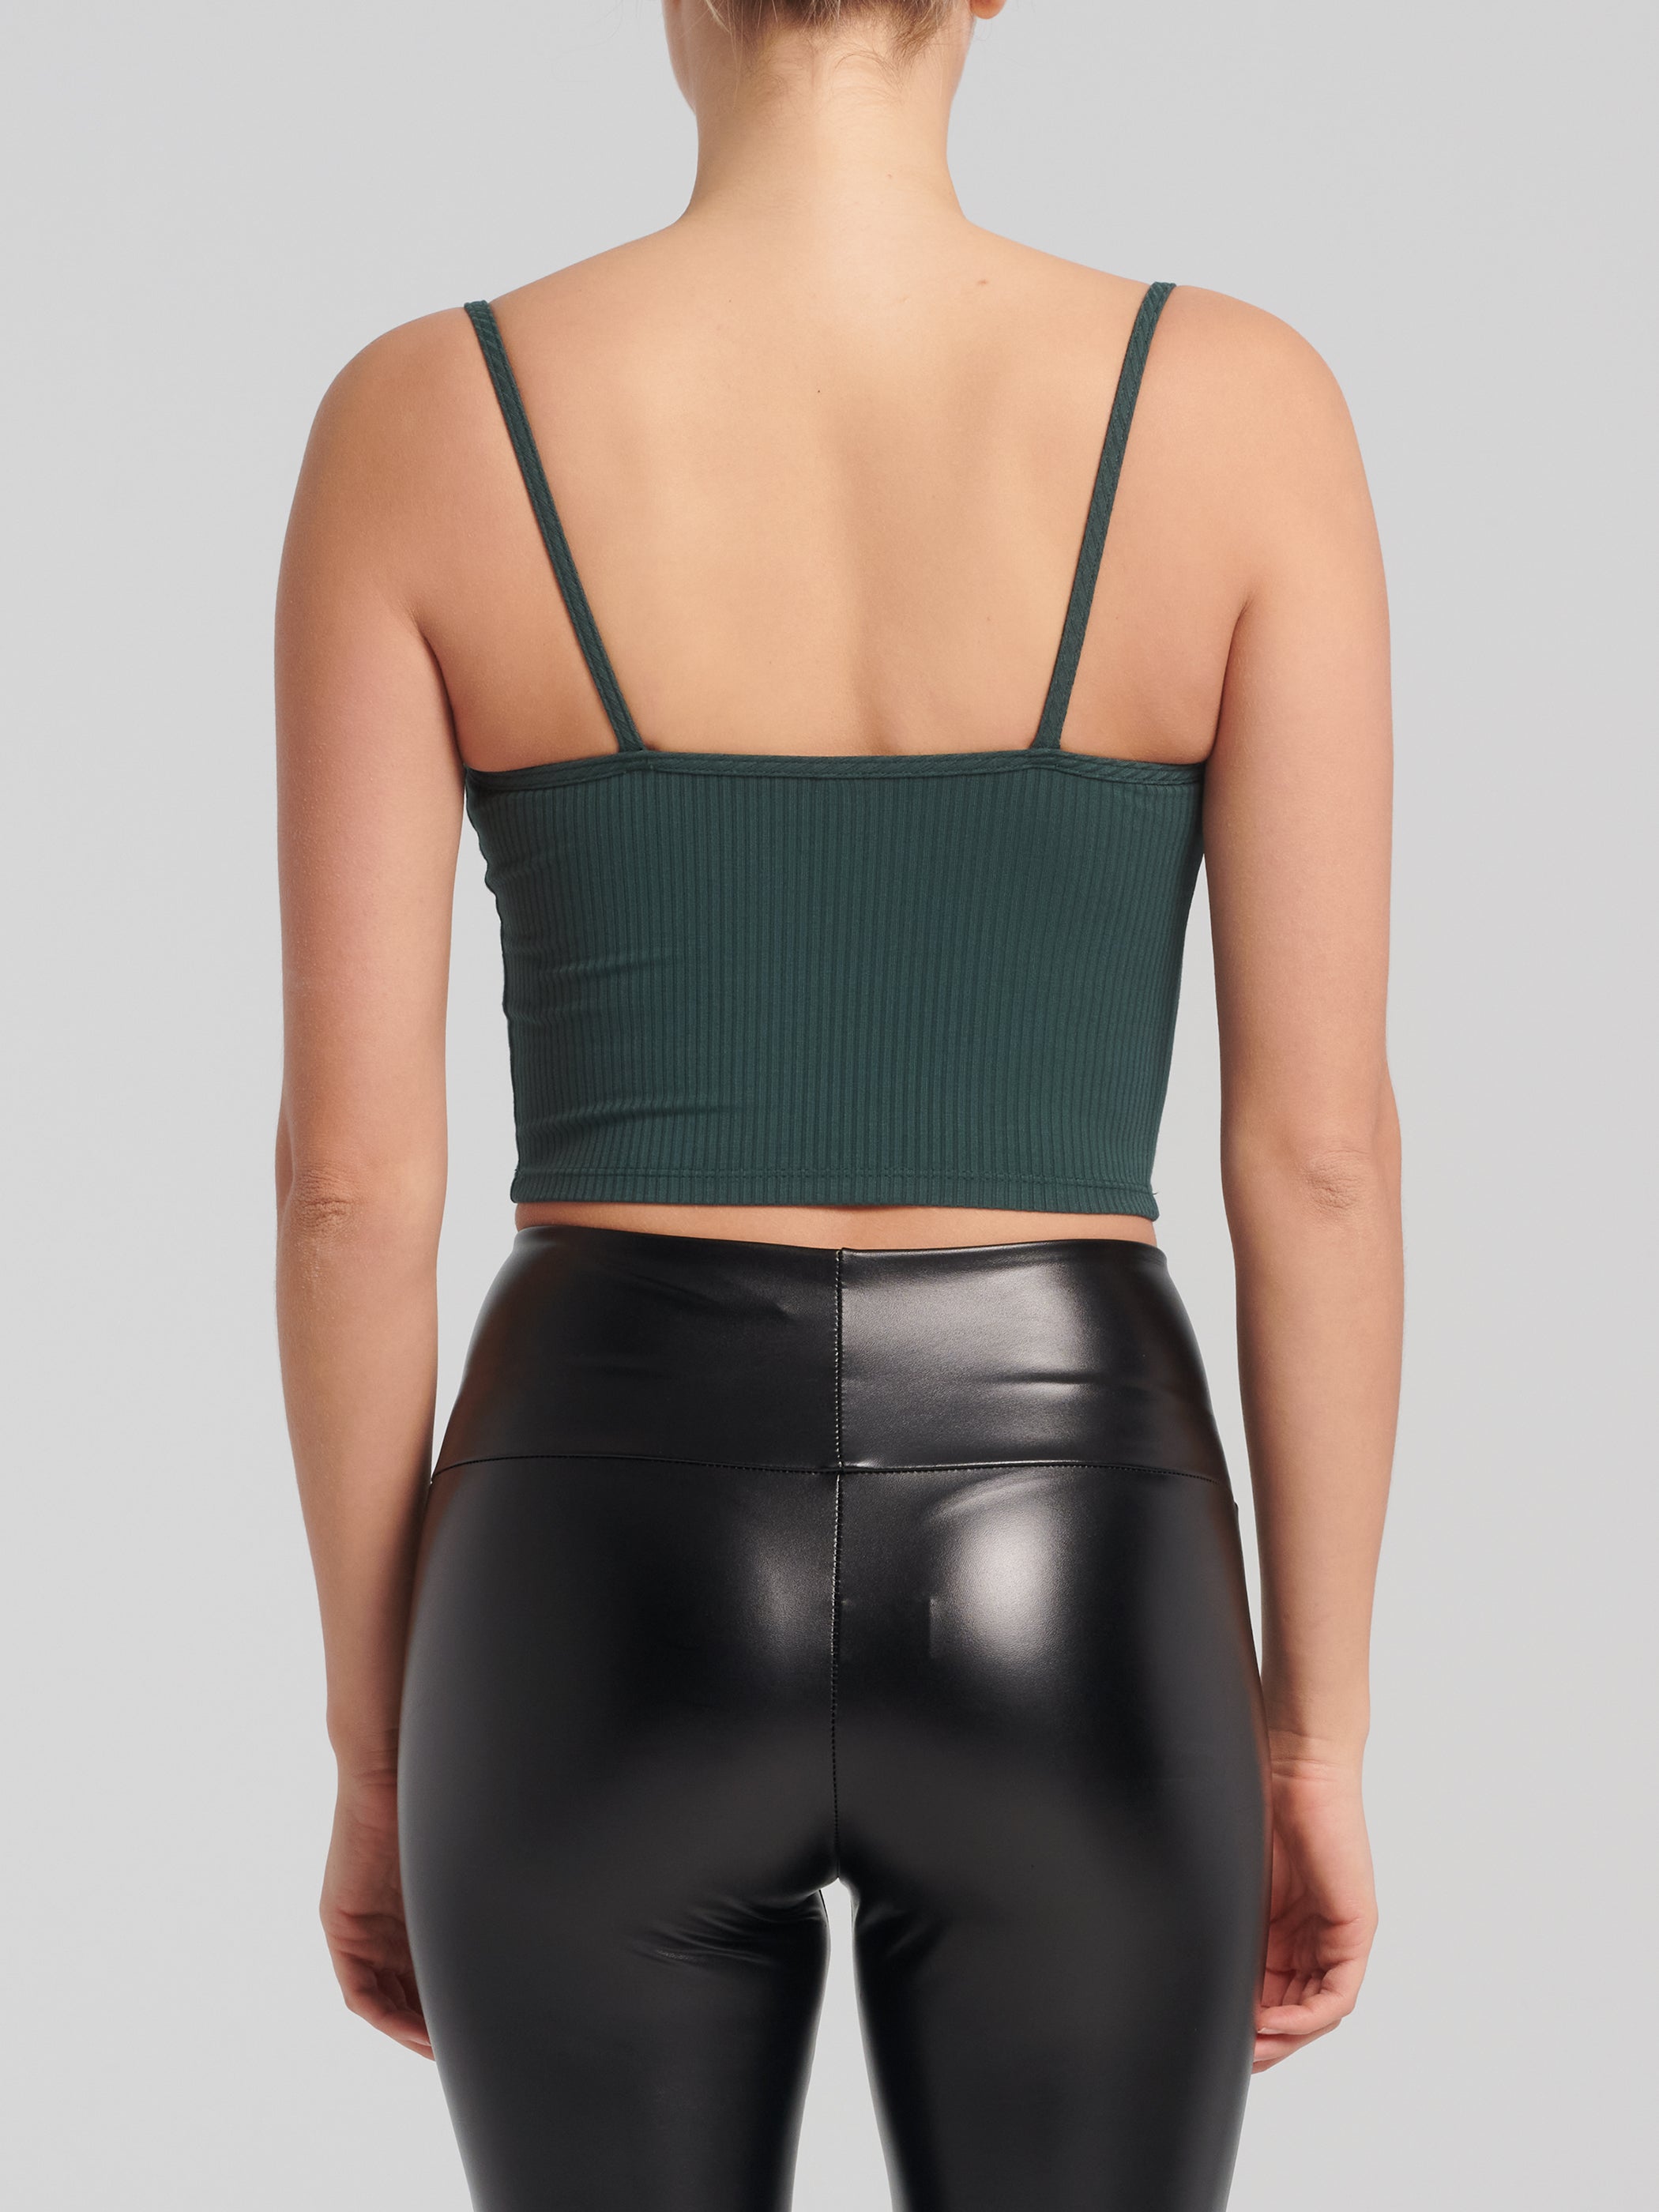 Inanna Bustier